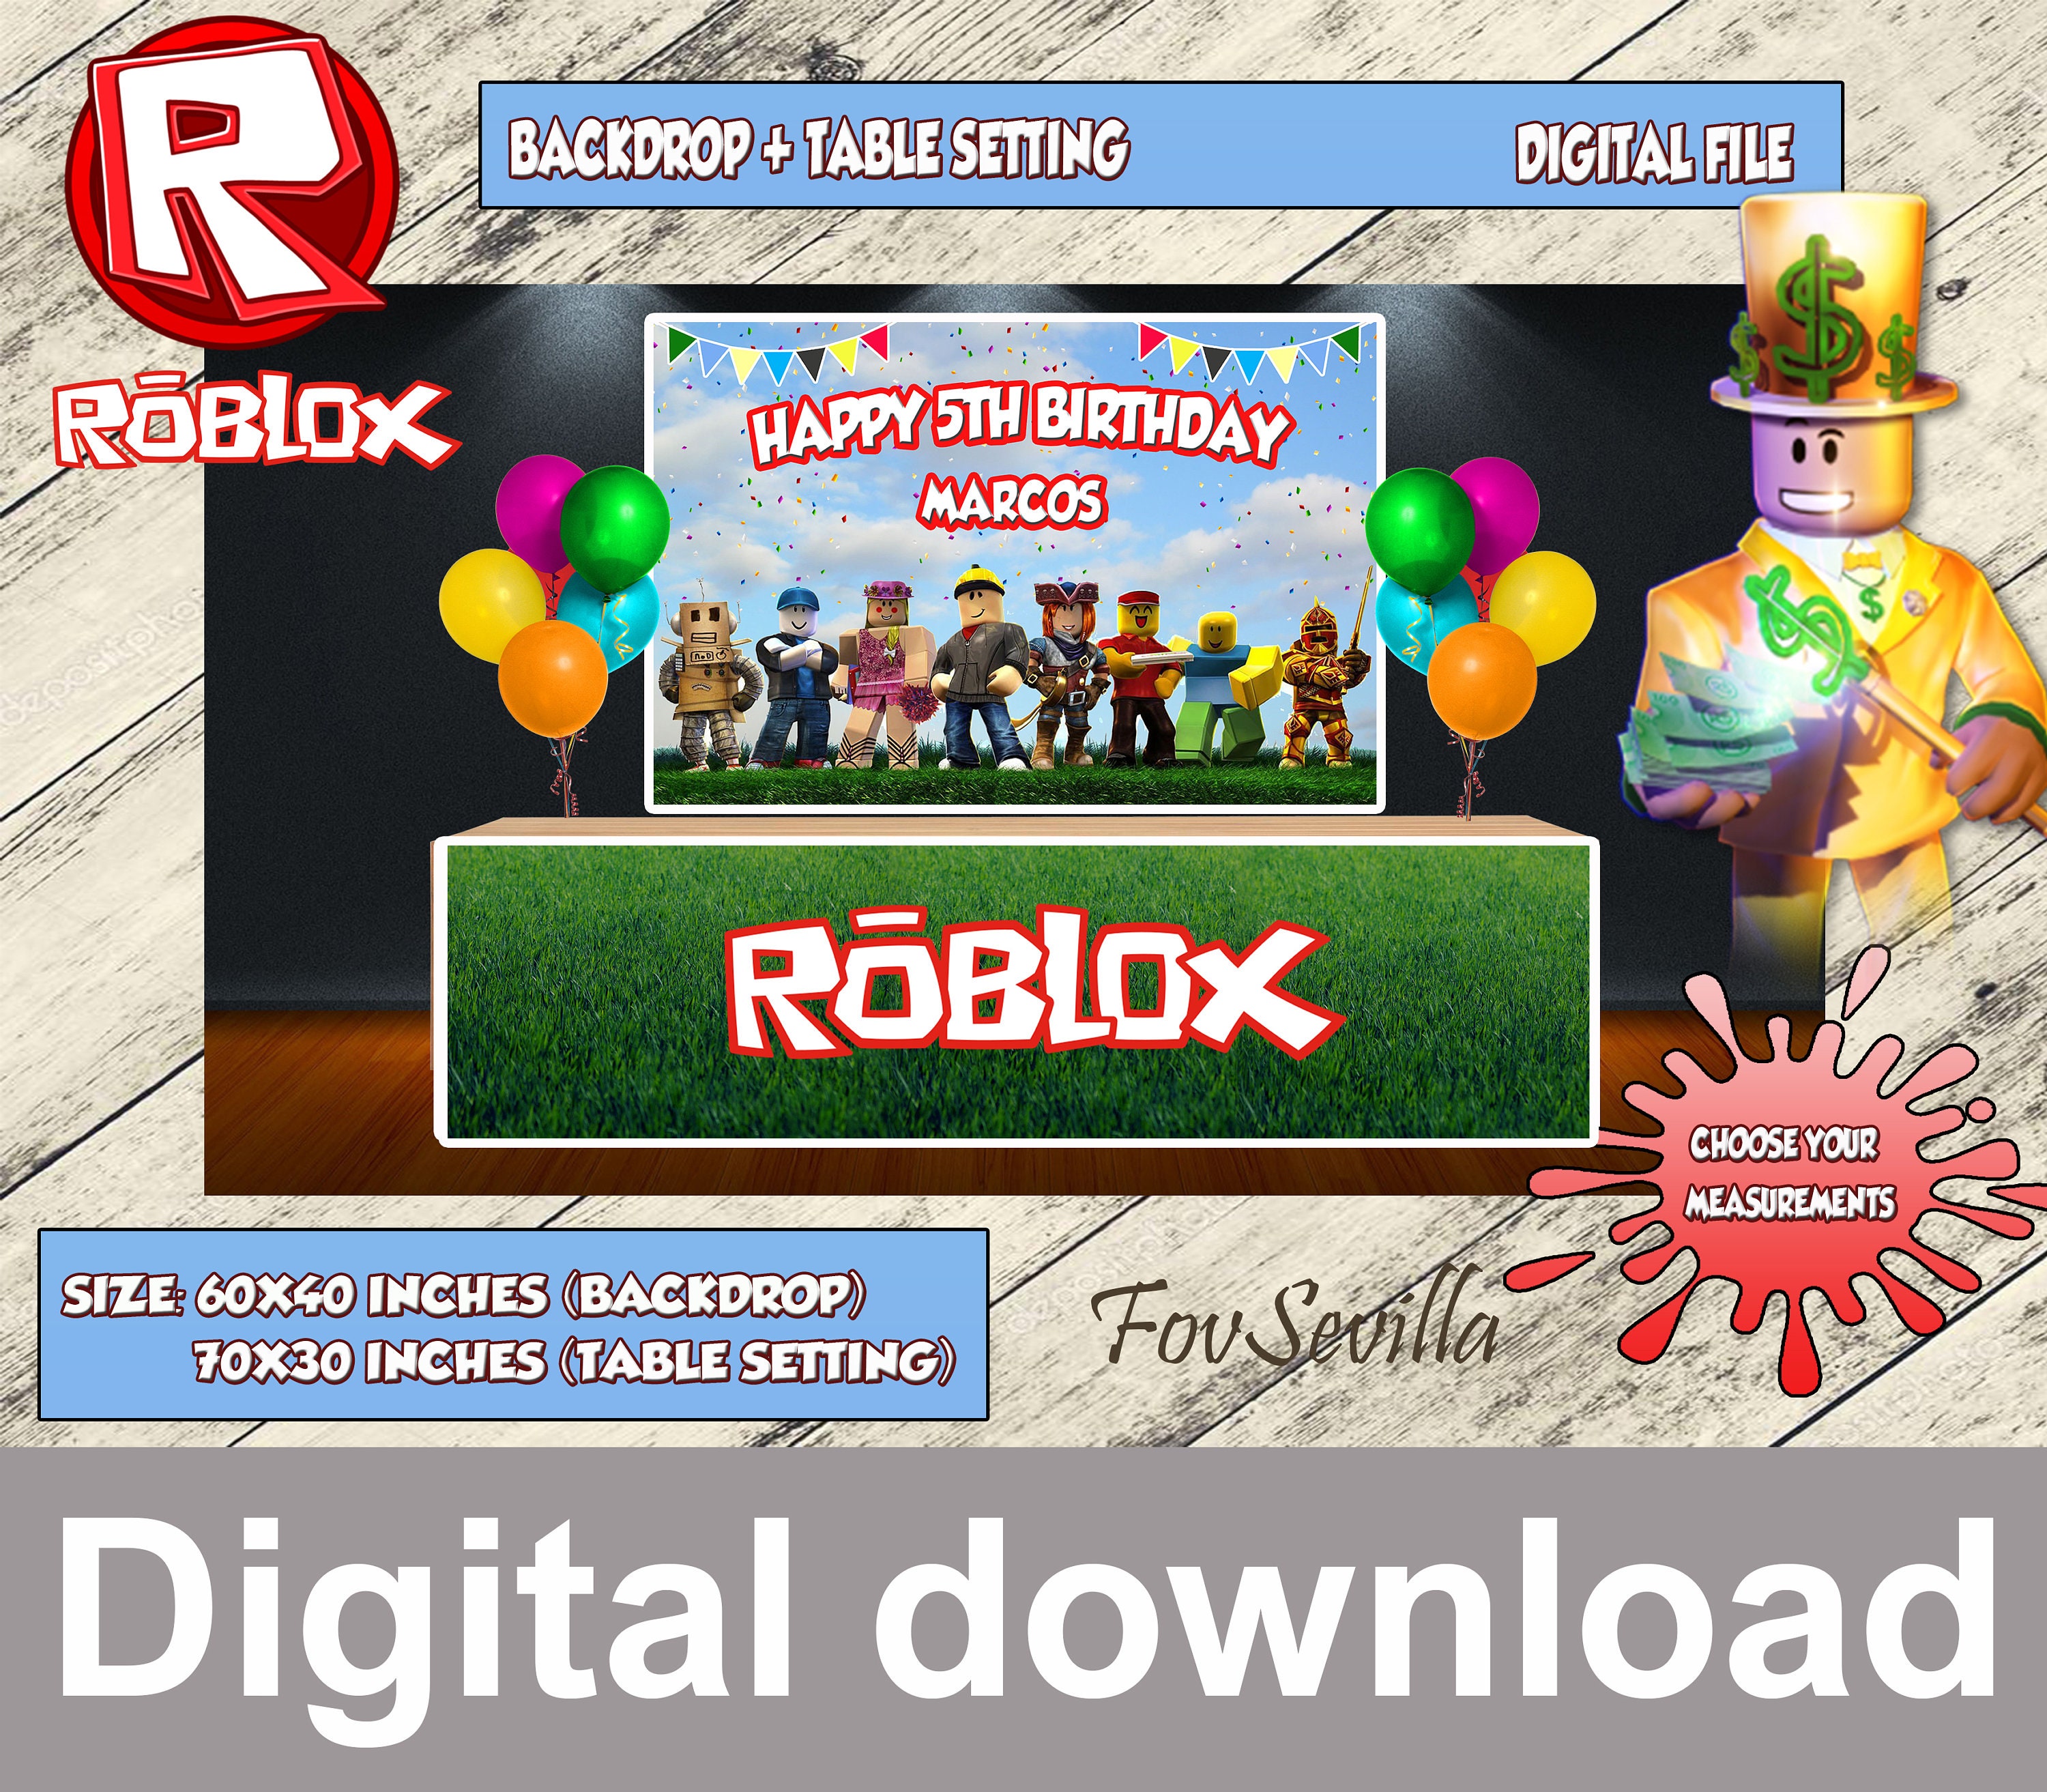 Backdrop Roblox Download Roblox Party Poster Roblox Digital Etsy - roblox cards roblox thank you tags instant download etsy